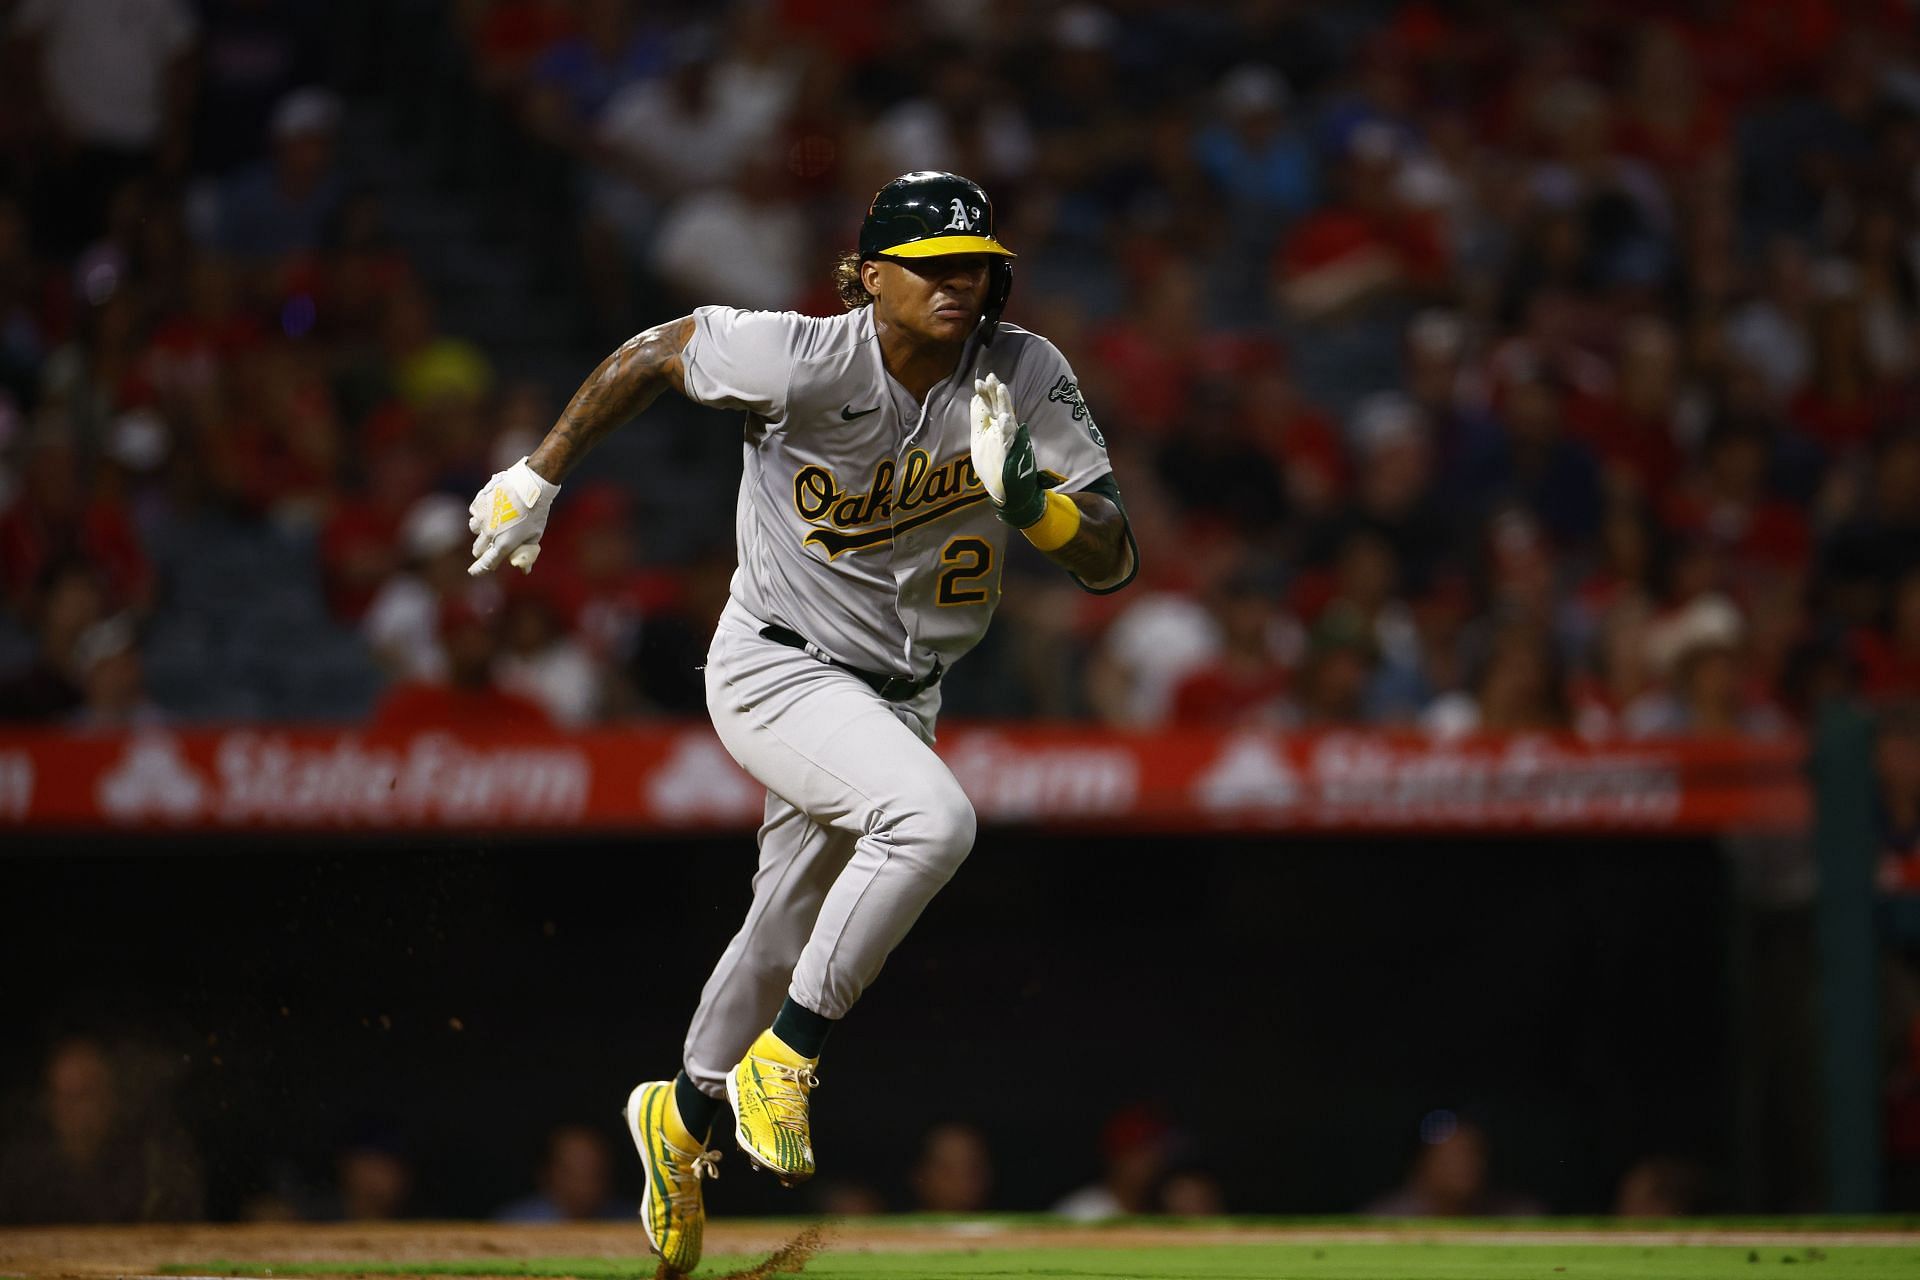 WELCOME TO THE PHILLIES CRISTIAN PACHE #MLB, #PHILLIES